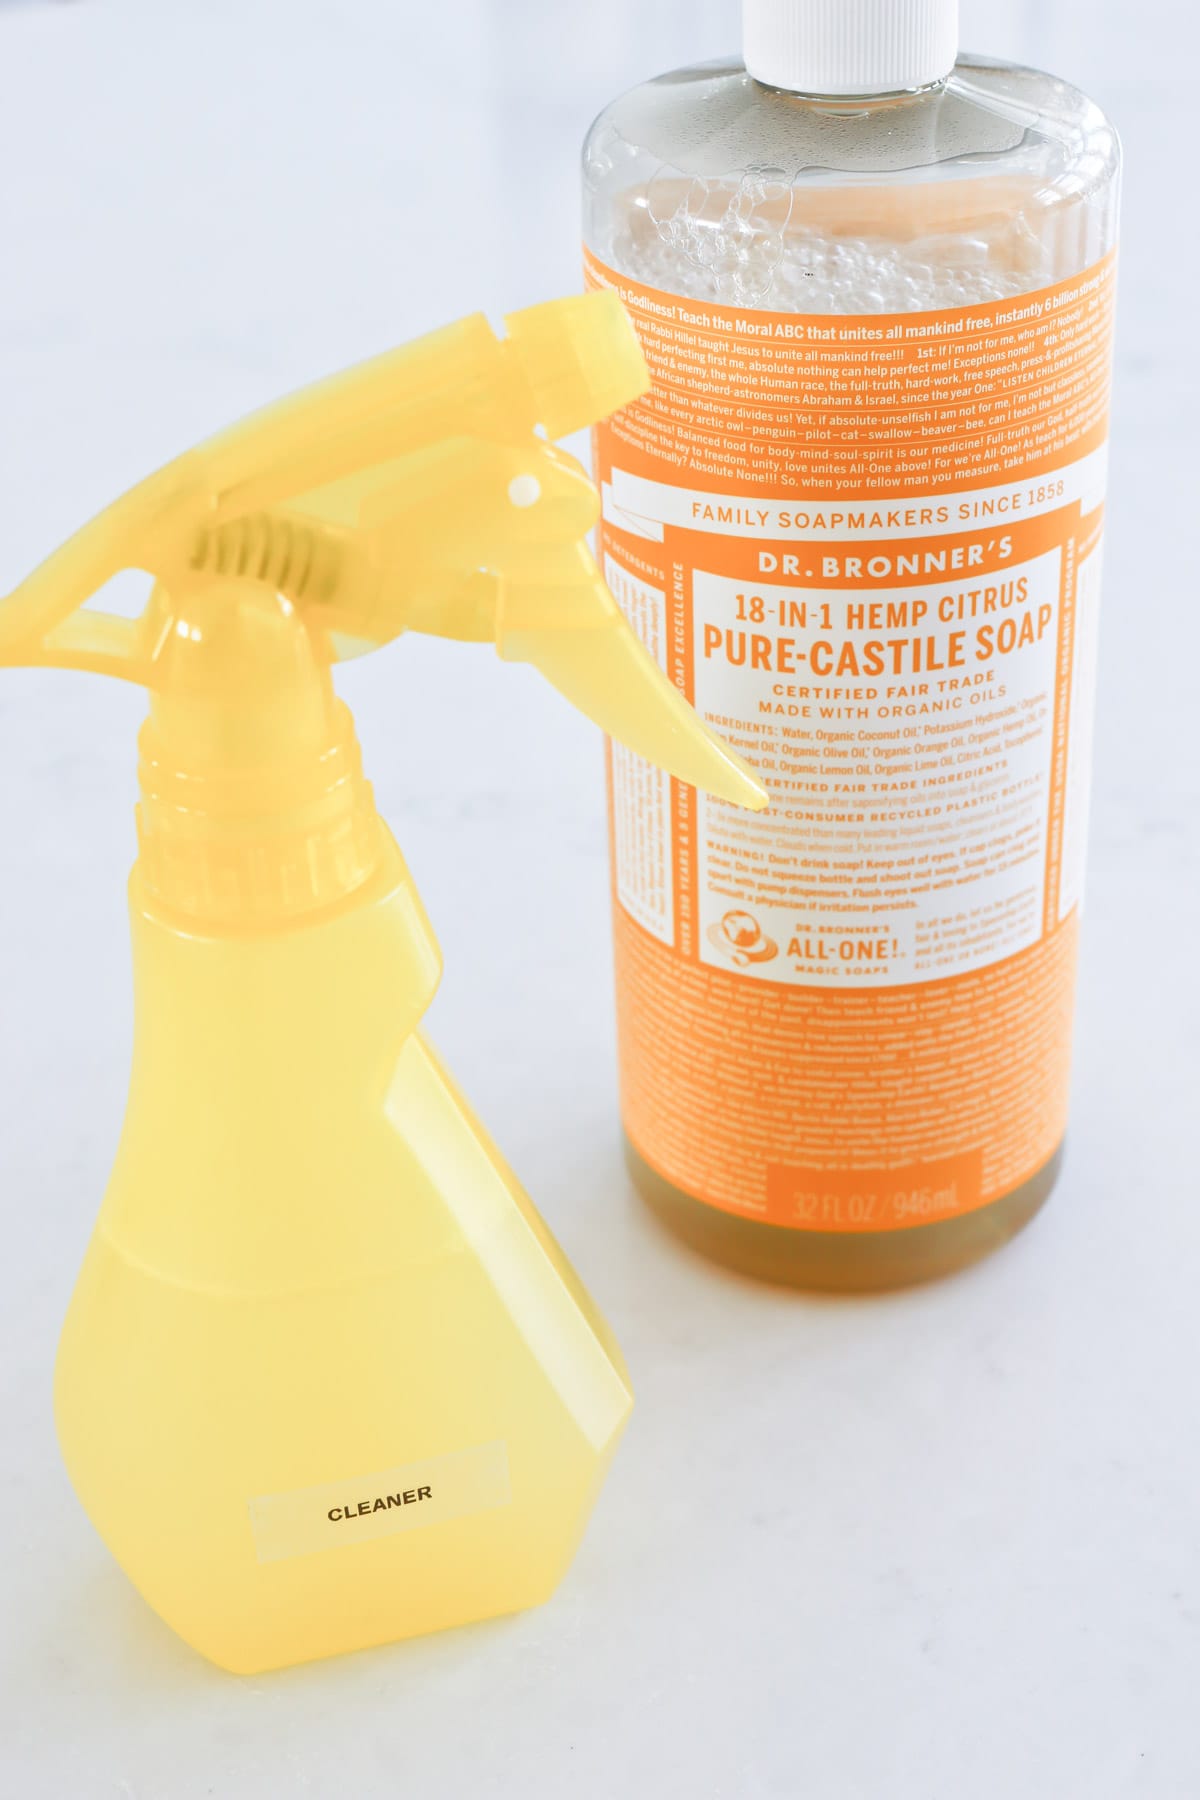 All purpose cleaner for kids to use